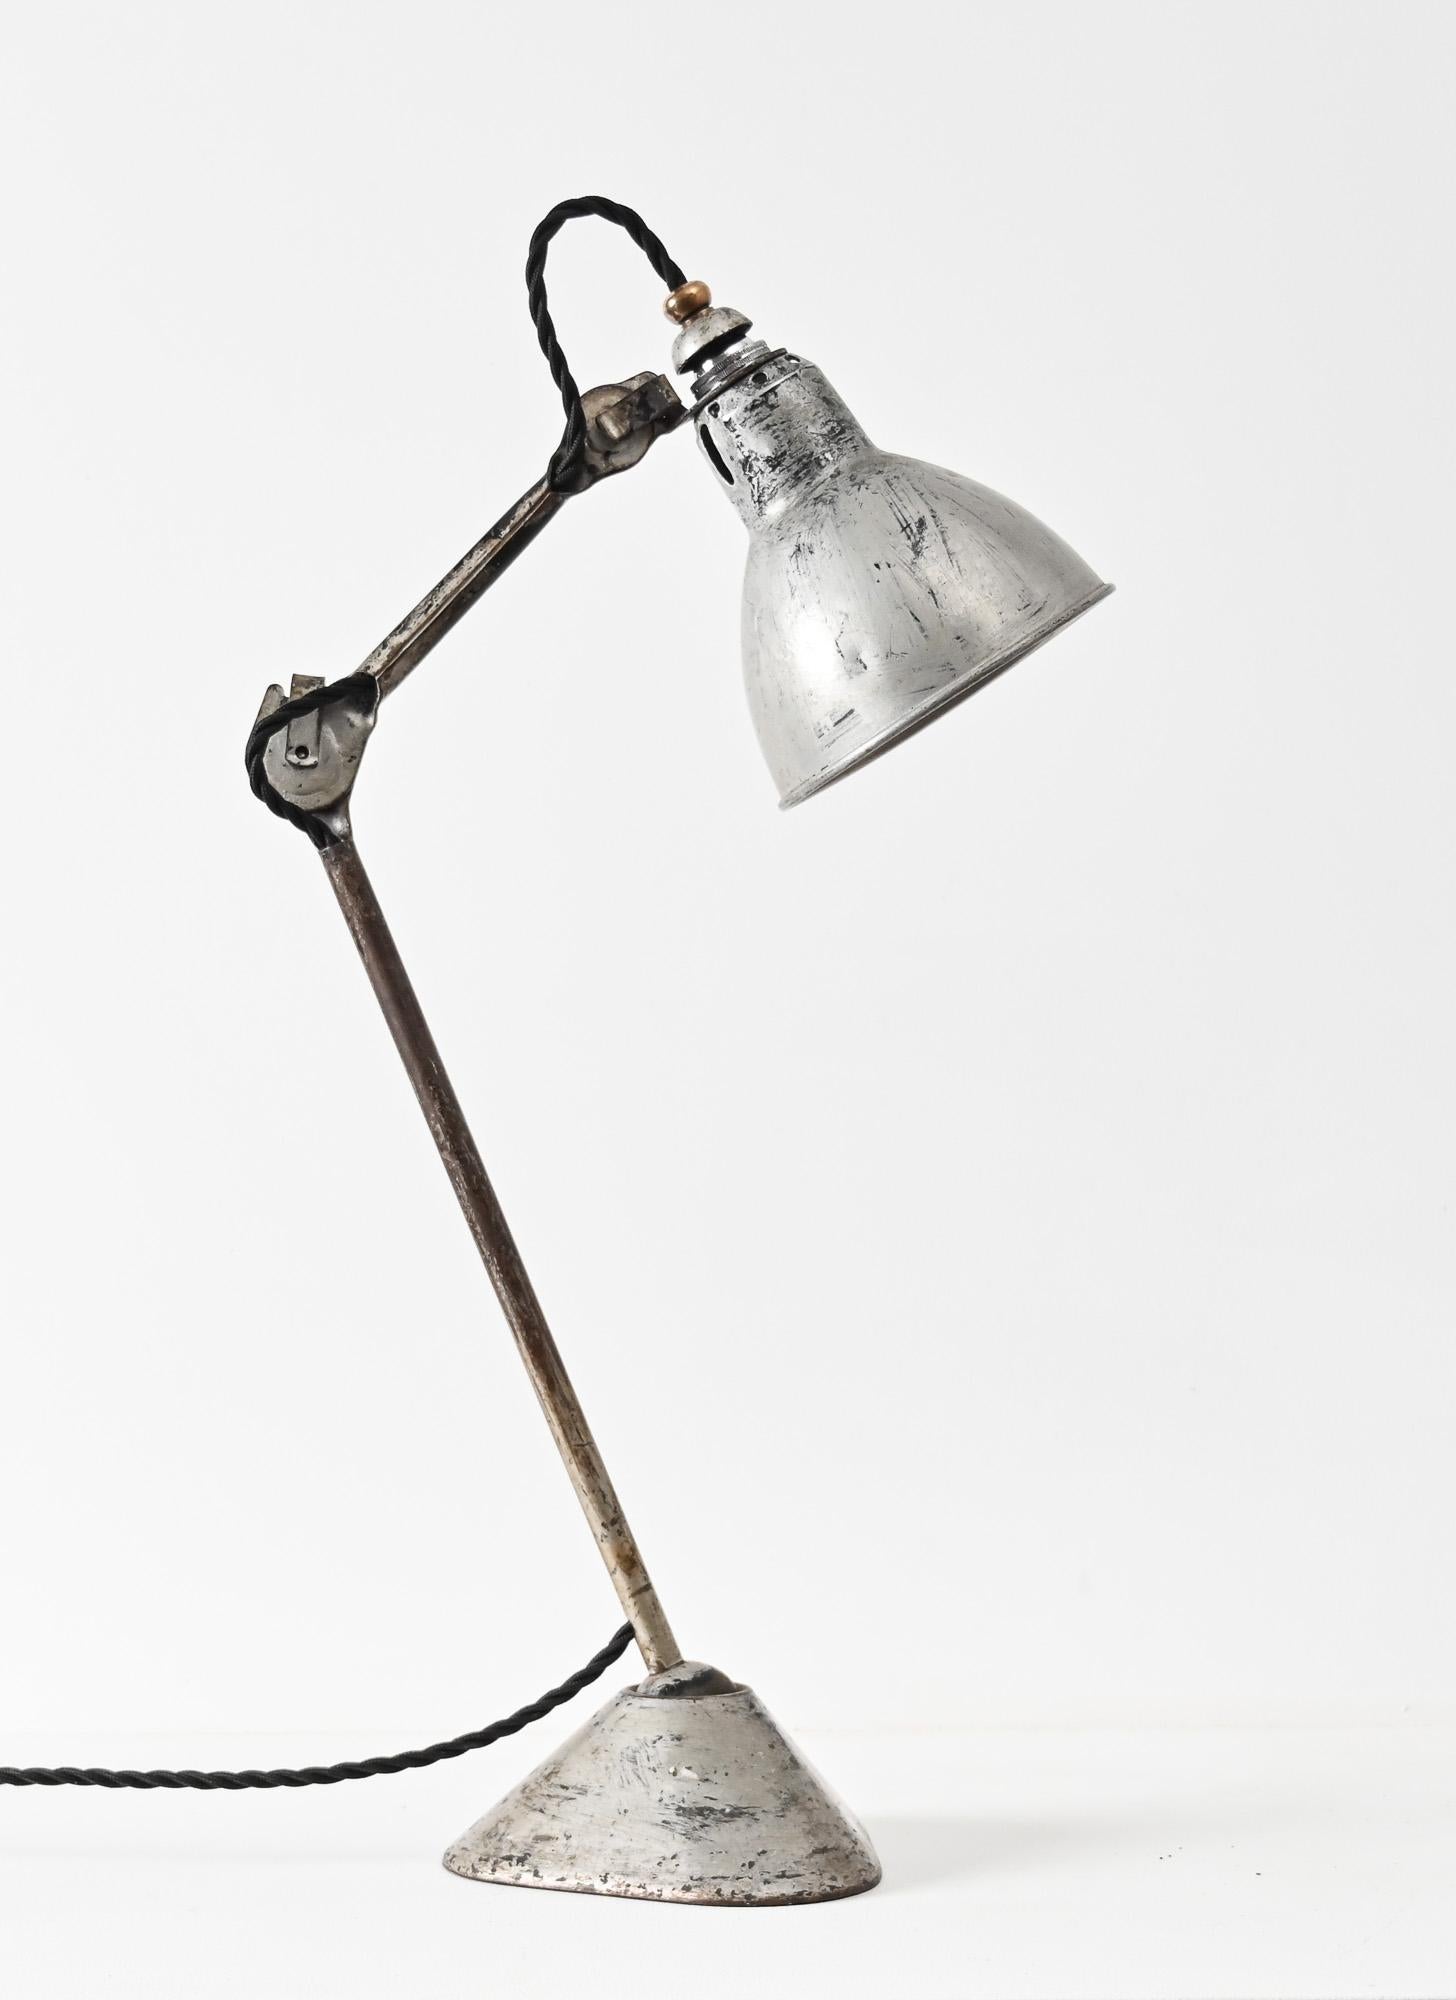 Gras model 205 designed in the 1930s by Bernard Albin Gras. Cast iron base, two adjustable arms and its original reflector. A classic industrial design made popular by Le Corbusier and Henri Matisse, to name a few. This example has been rewired and